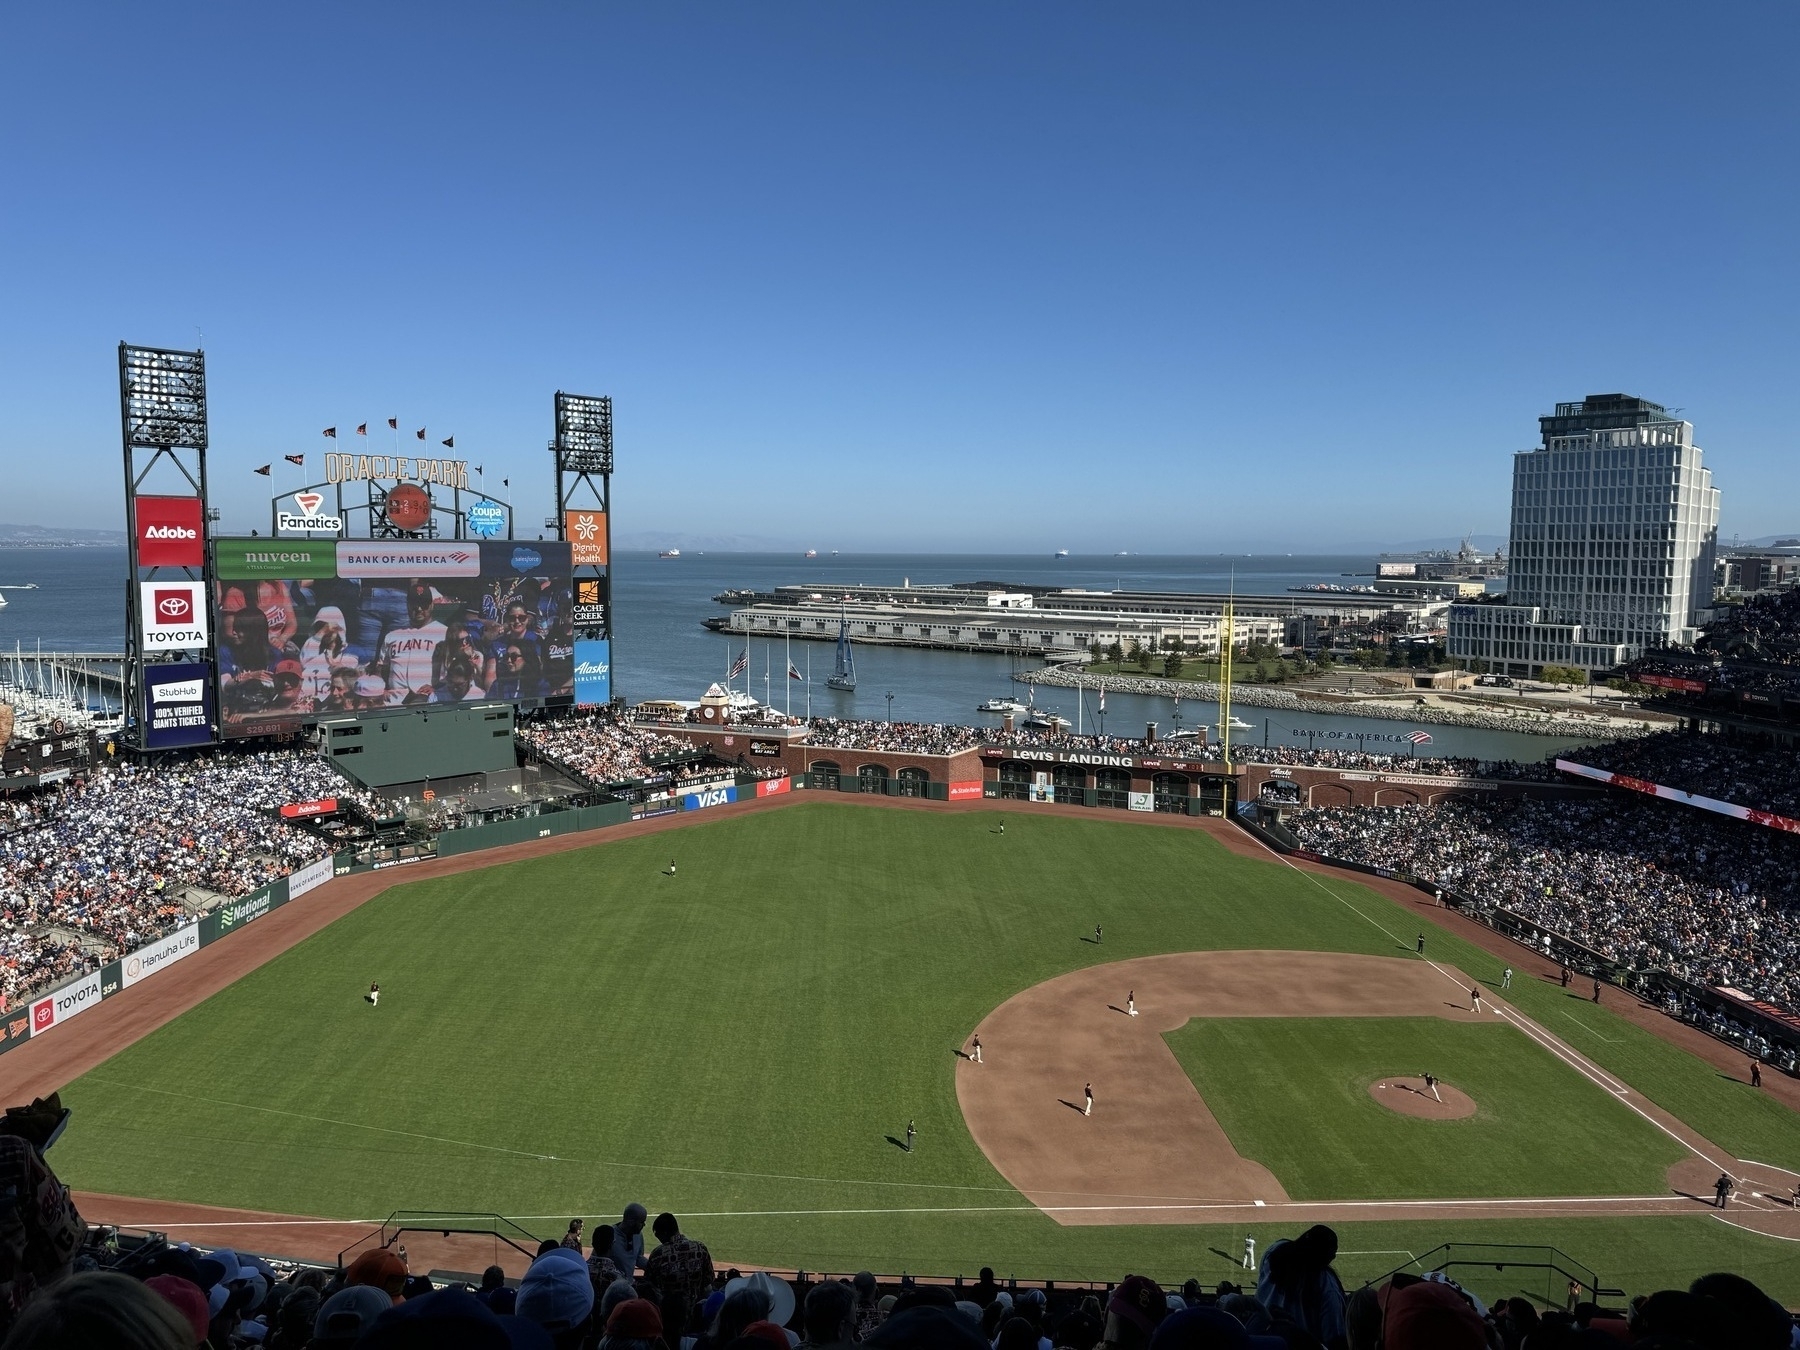 View of Oracle Park baseball park from the stands